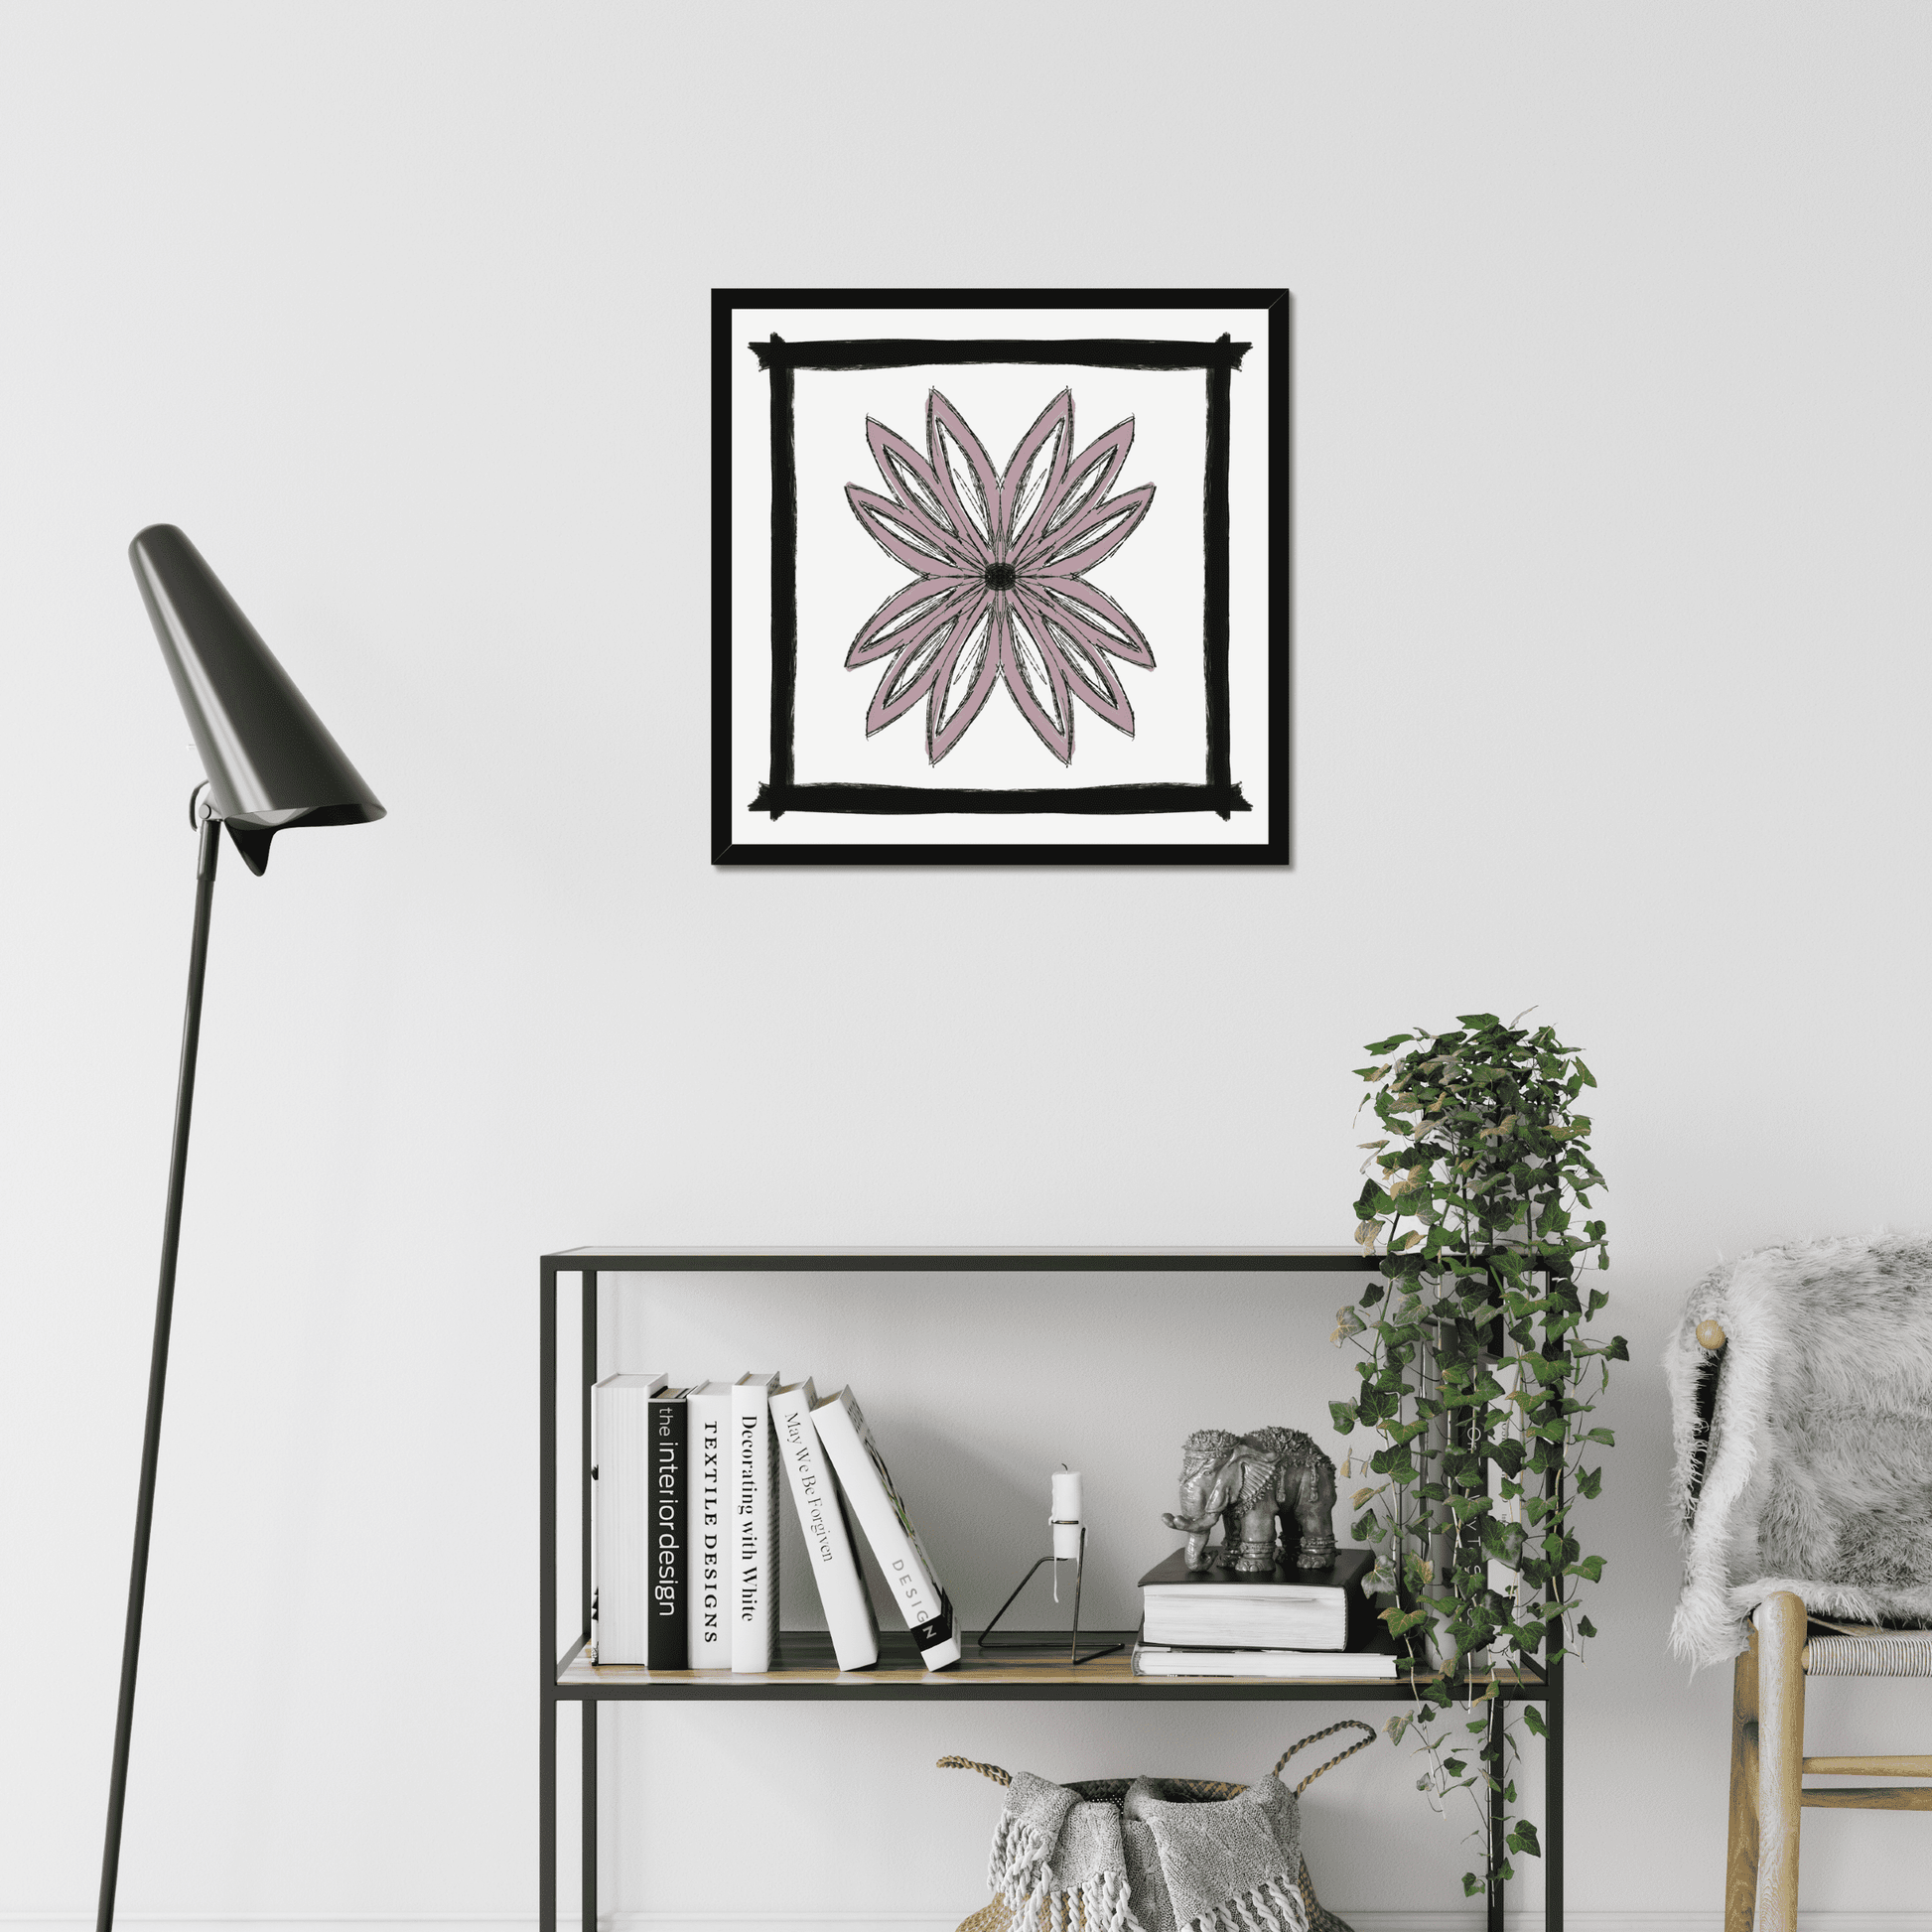 A hard and impactful style flower print, bold and simple in black, white and muted pink tones.  We love the striking sketch format of this print, and think it screaming out for gallery wall placement.  With its bold and quirky design, it fits in perfectly with an eclectic home decor style.